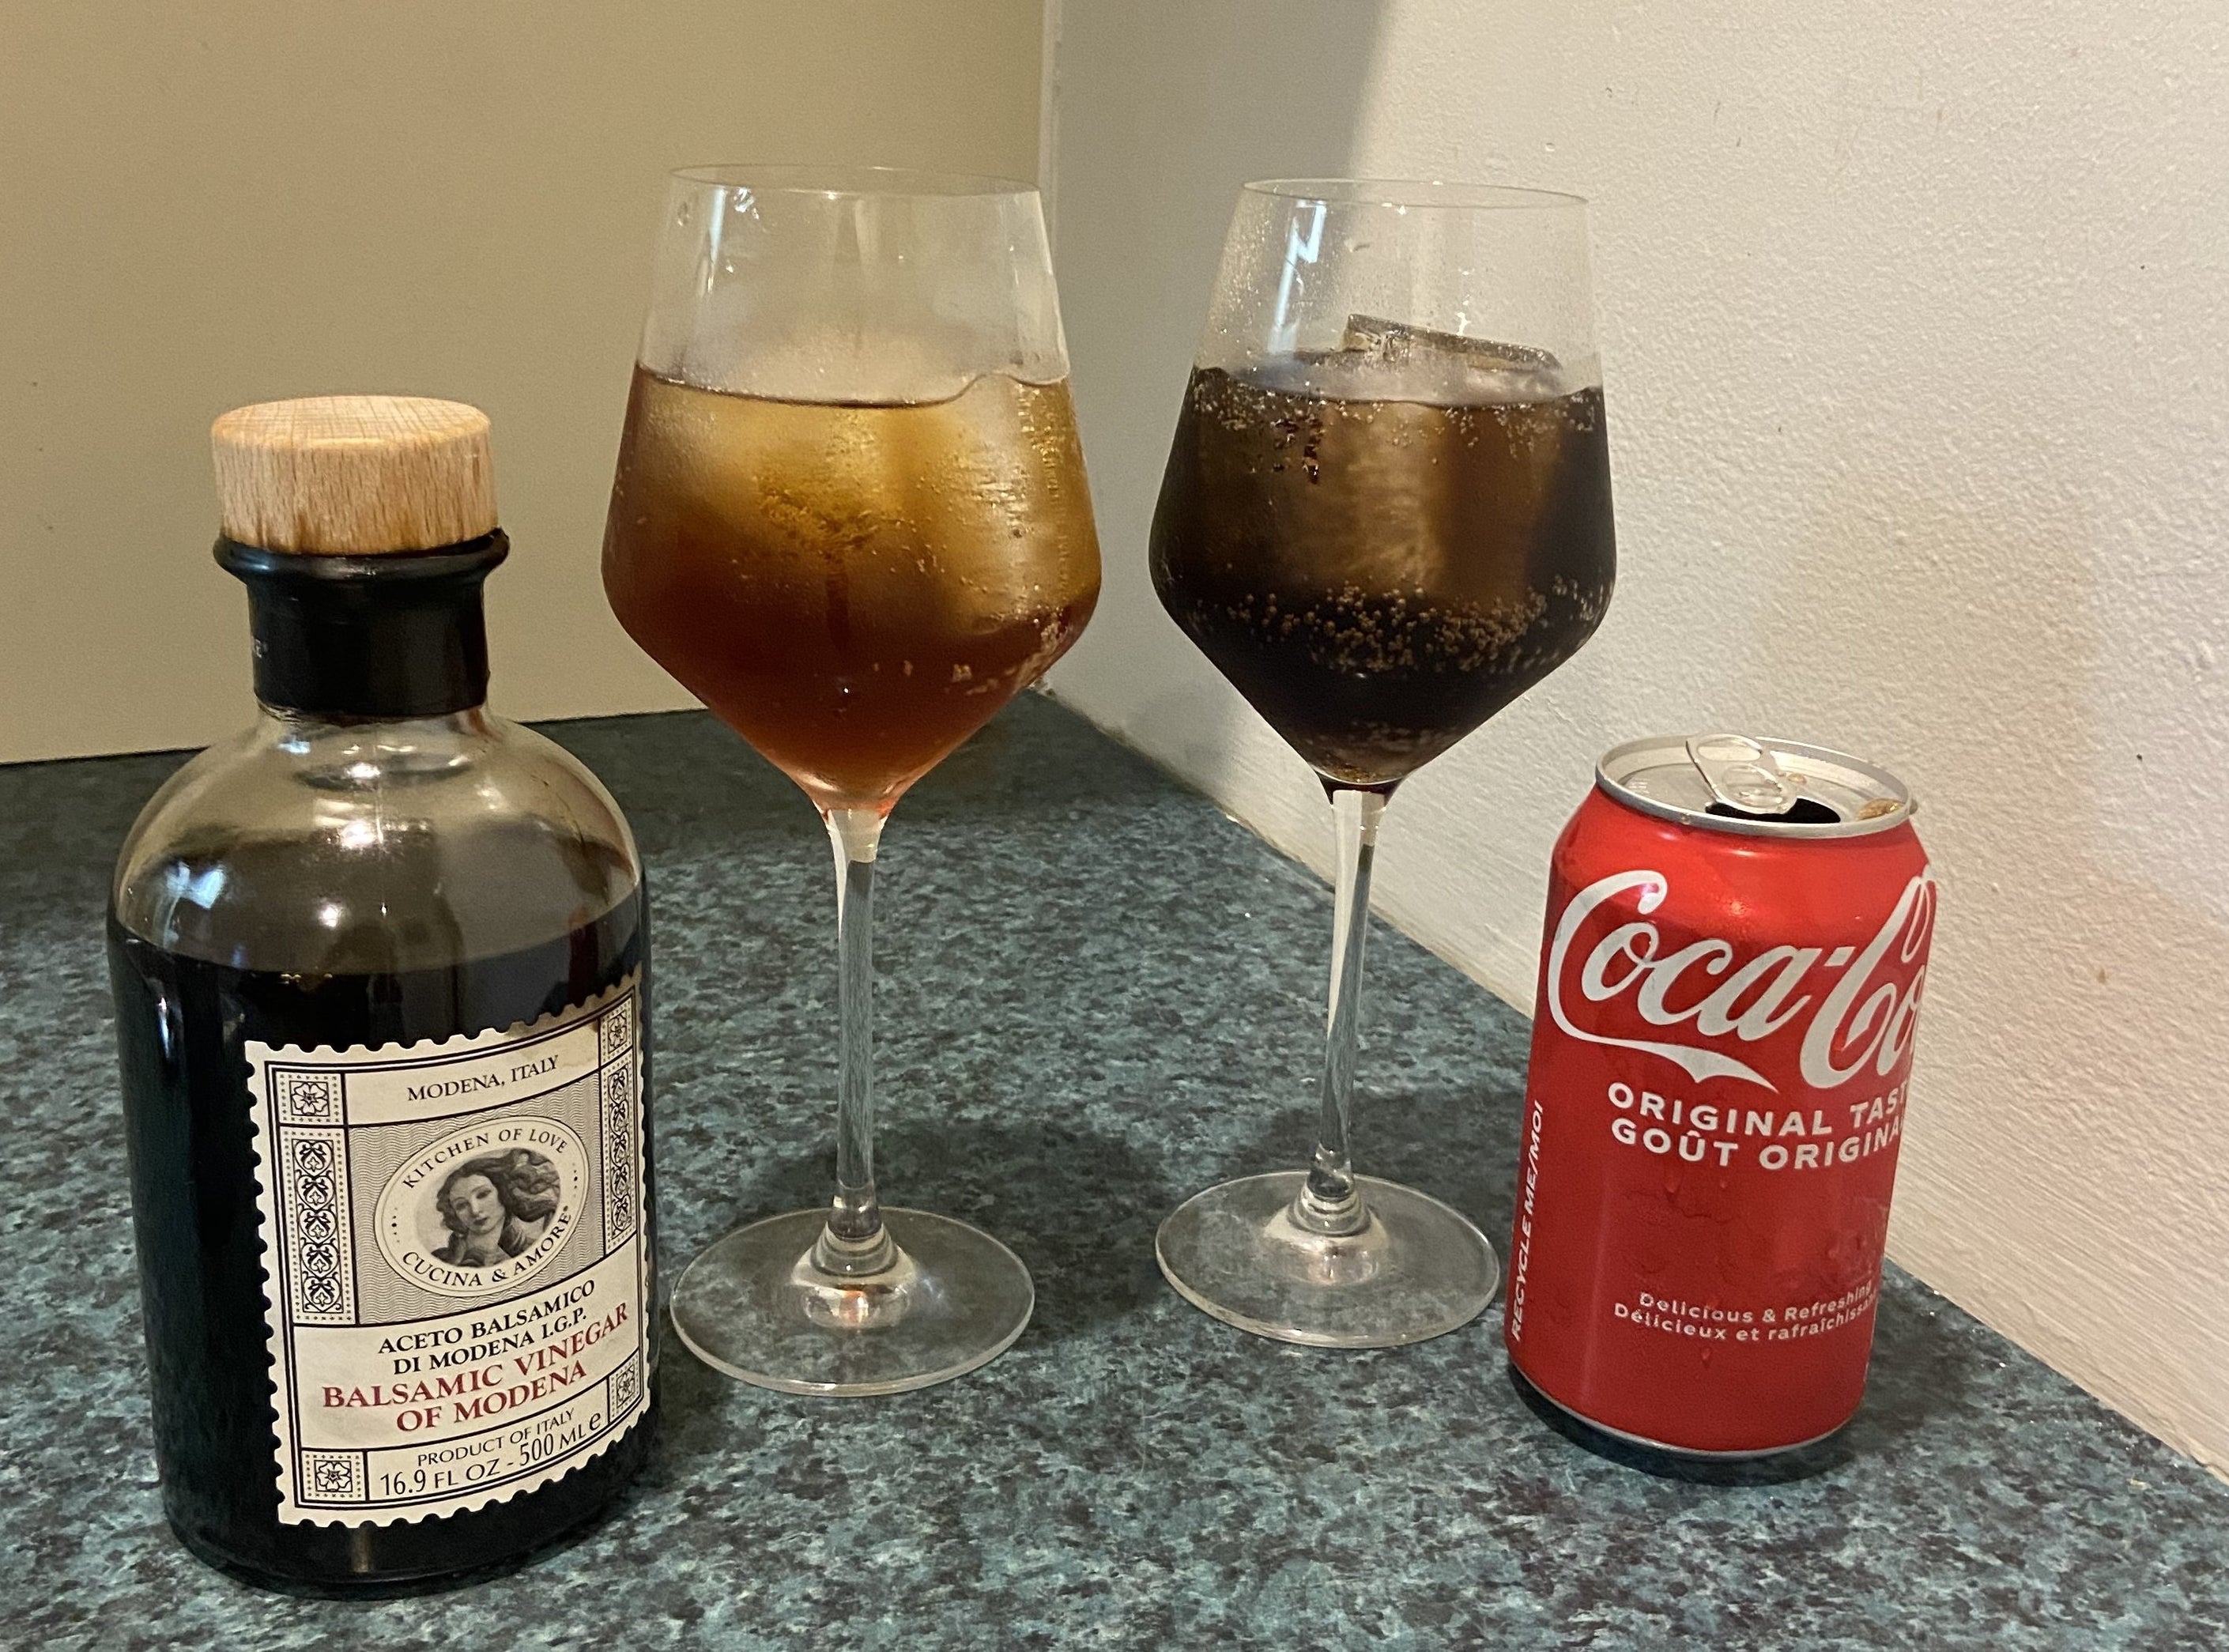 The glass of ice, vinegar, and La Croix next to a glass of Coke, which looks darker